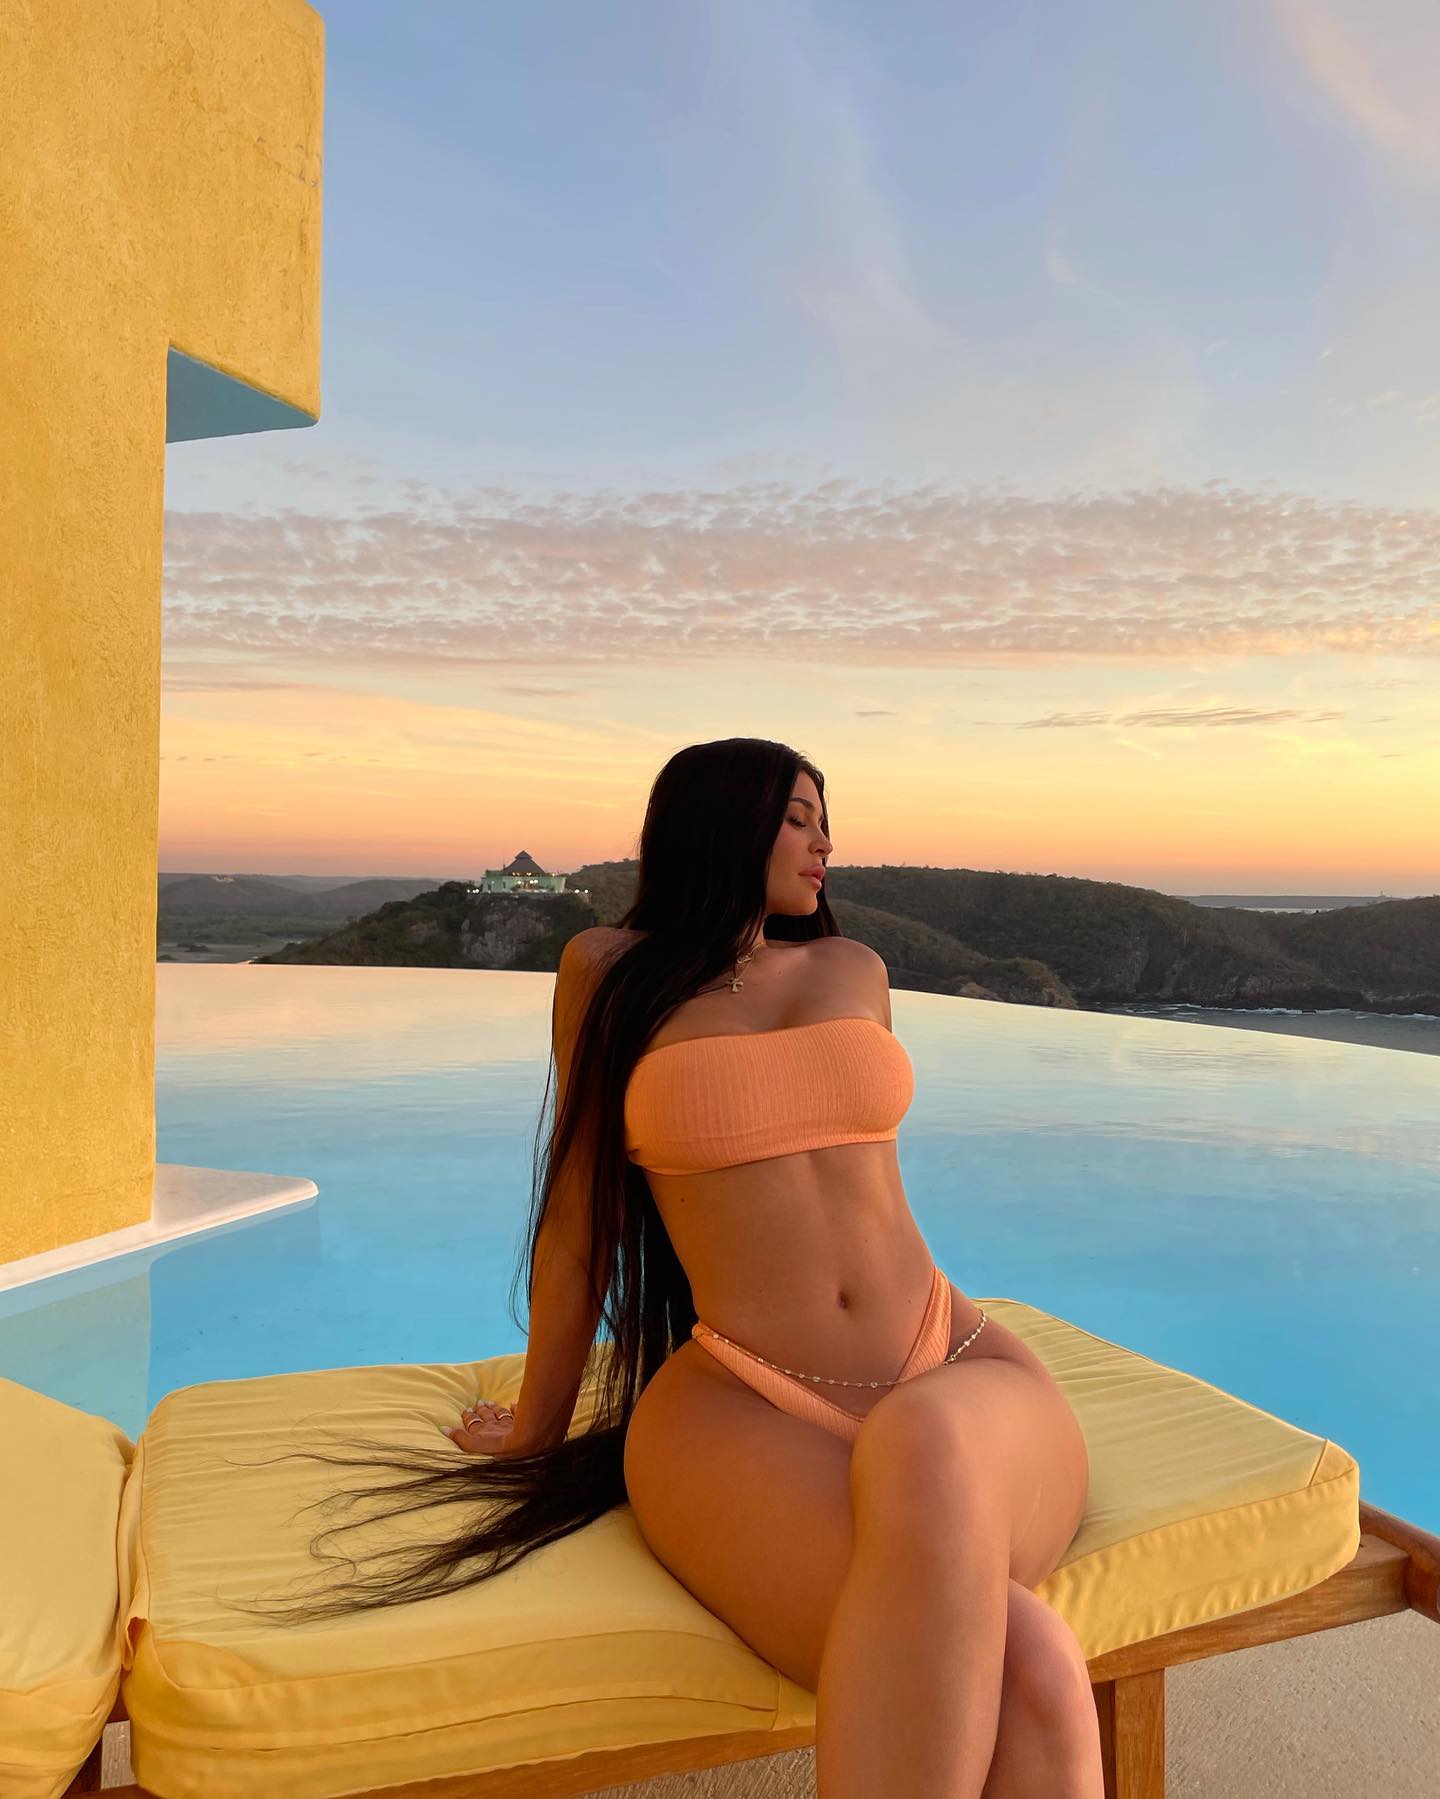 Photos n°4 : Kylie Jenner’s Shadow is Breaking the Internet!